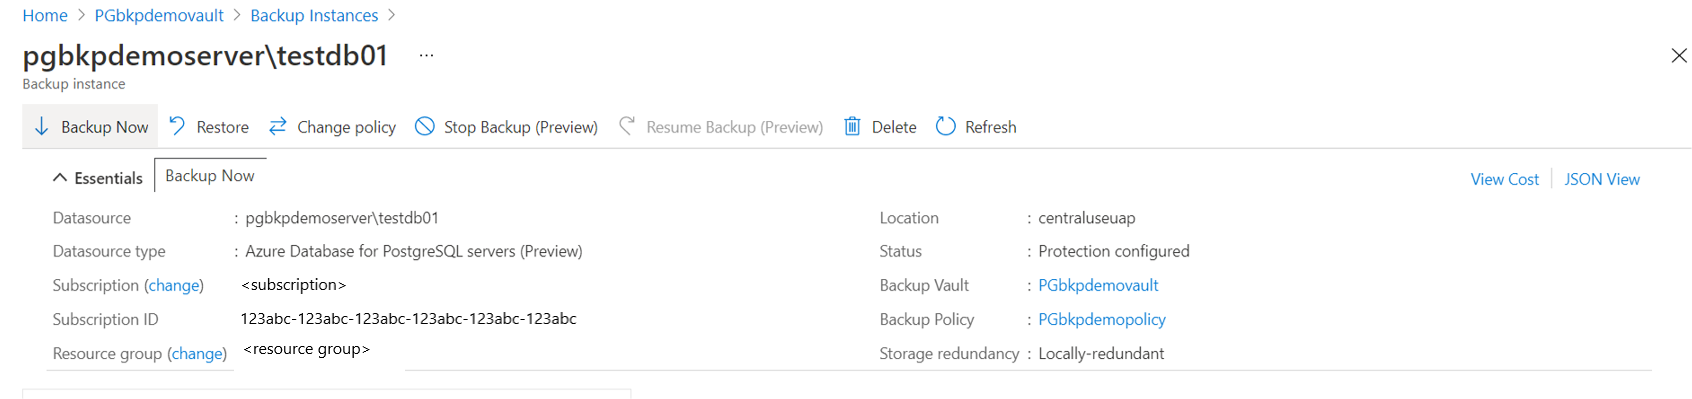 Screenshot showing the option to navigate to the list of retention rules that were defined in the associated Backup policy.